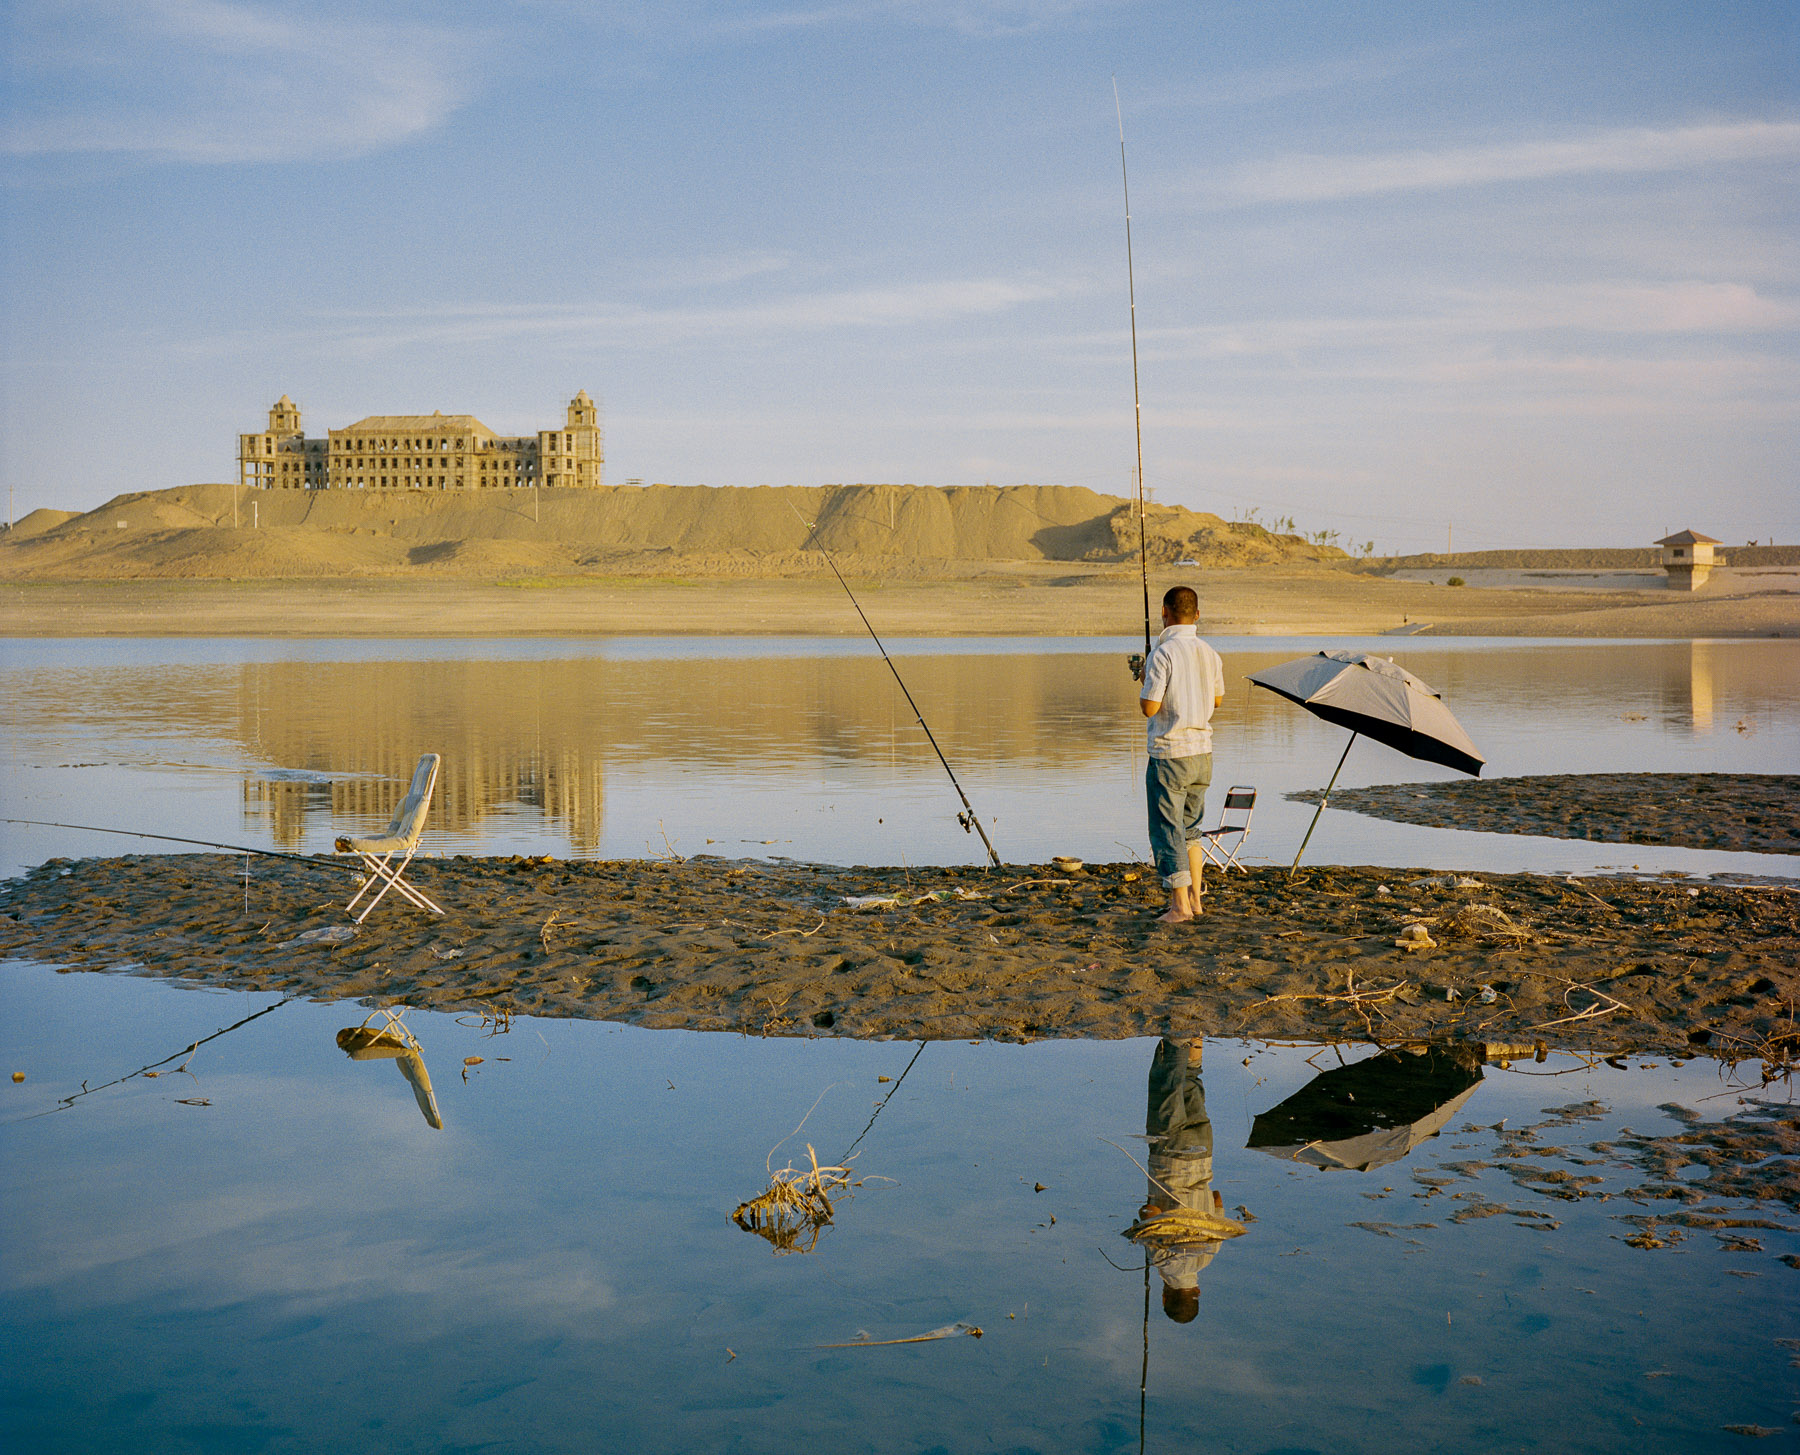  June 2016. Xinjiang province, China. A Han Chinese migrant worker fishing in a small lake in the outskirts of Turpan. In the background, a typical item of China's fast developping West, a half-built half-decaying palace or government building. 